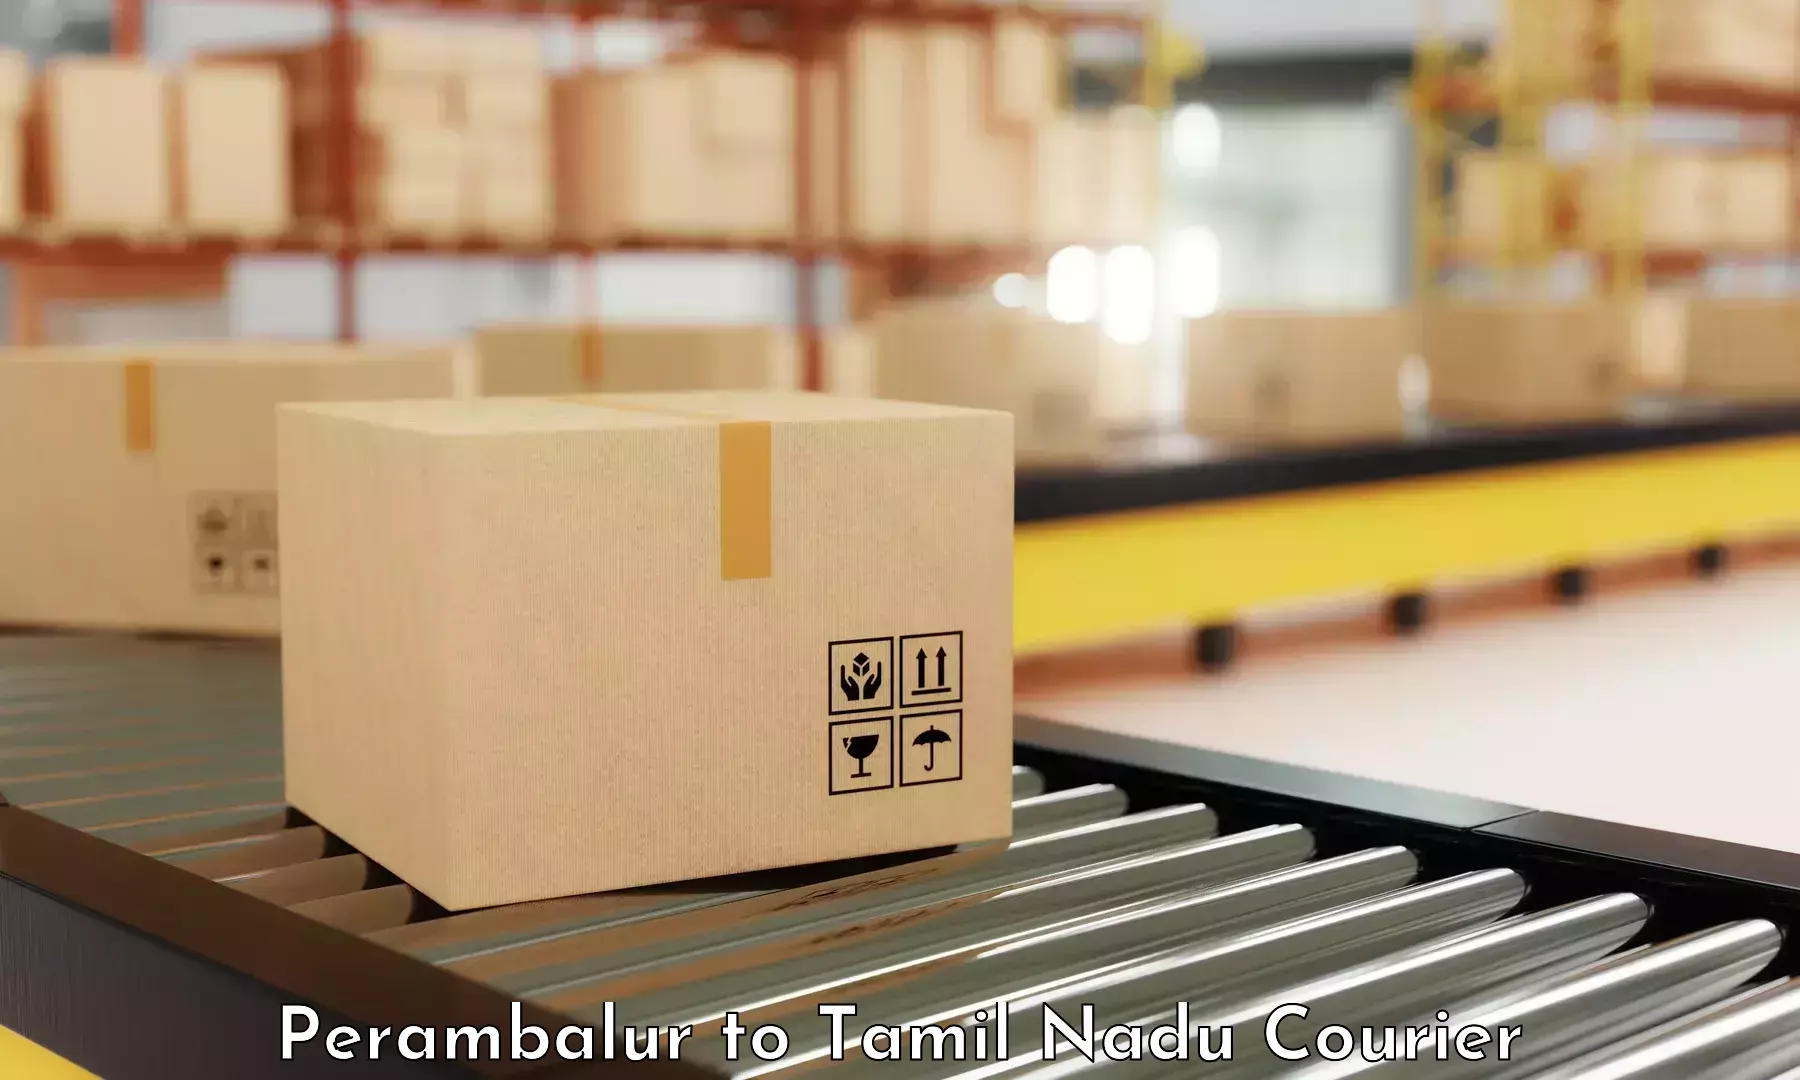 User-friendly courier app Perambalur to Park Town